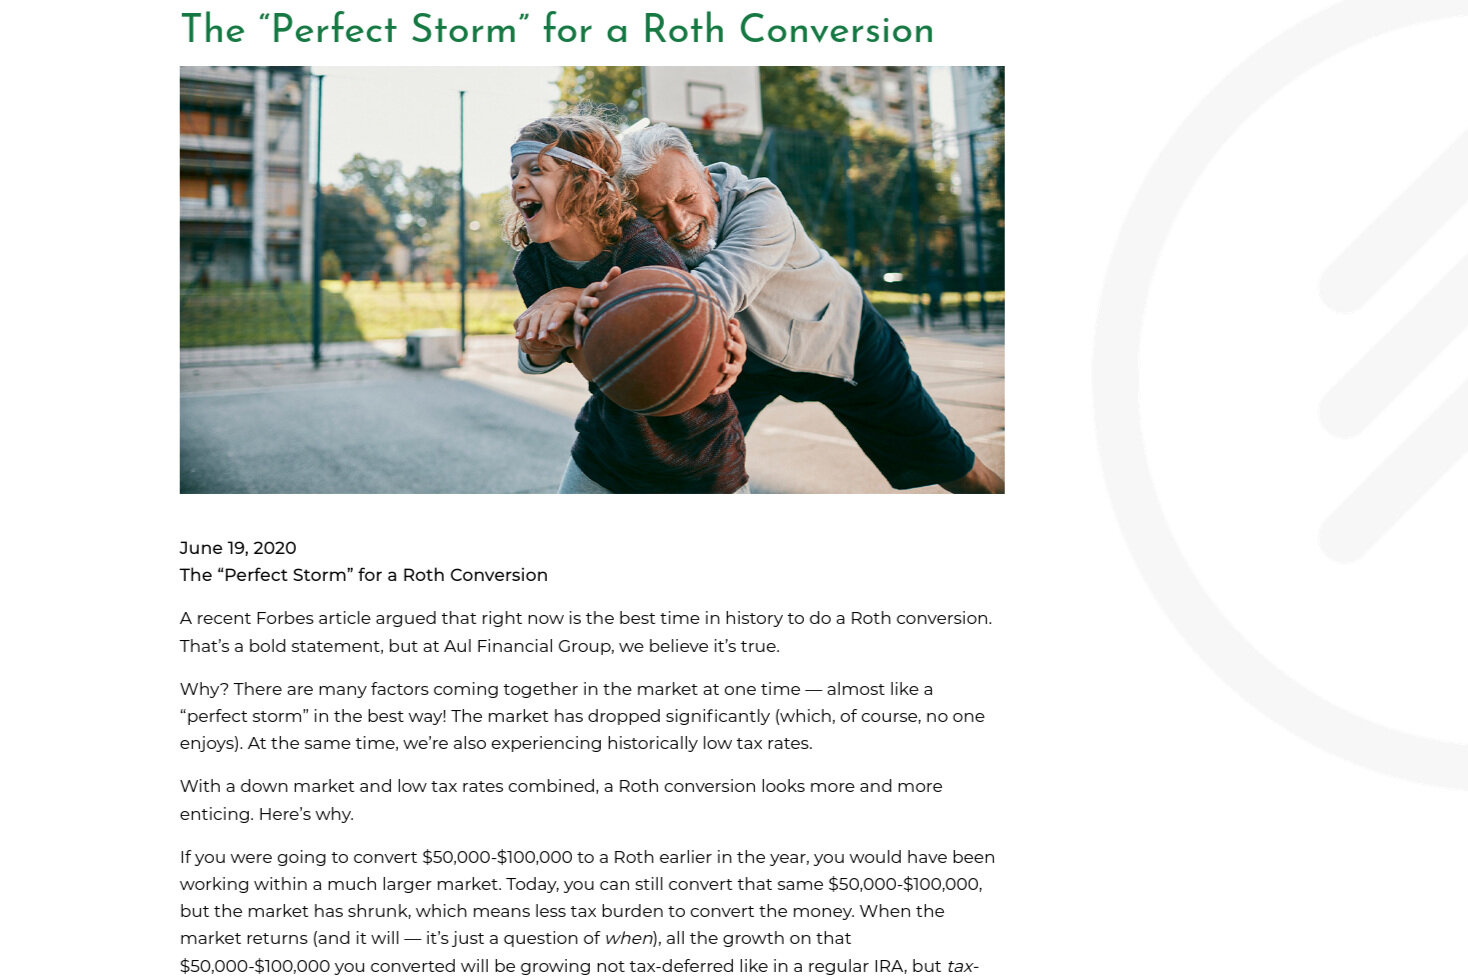 The_%E2%80%9CPerfect_Storm%E2%80%9D_for_a_Roth_Conversion_Aul_Financial_Group_%E2%80%93_St_Louis_Financial_Advisors.jpg